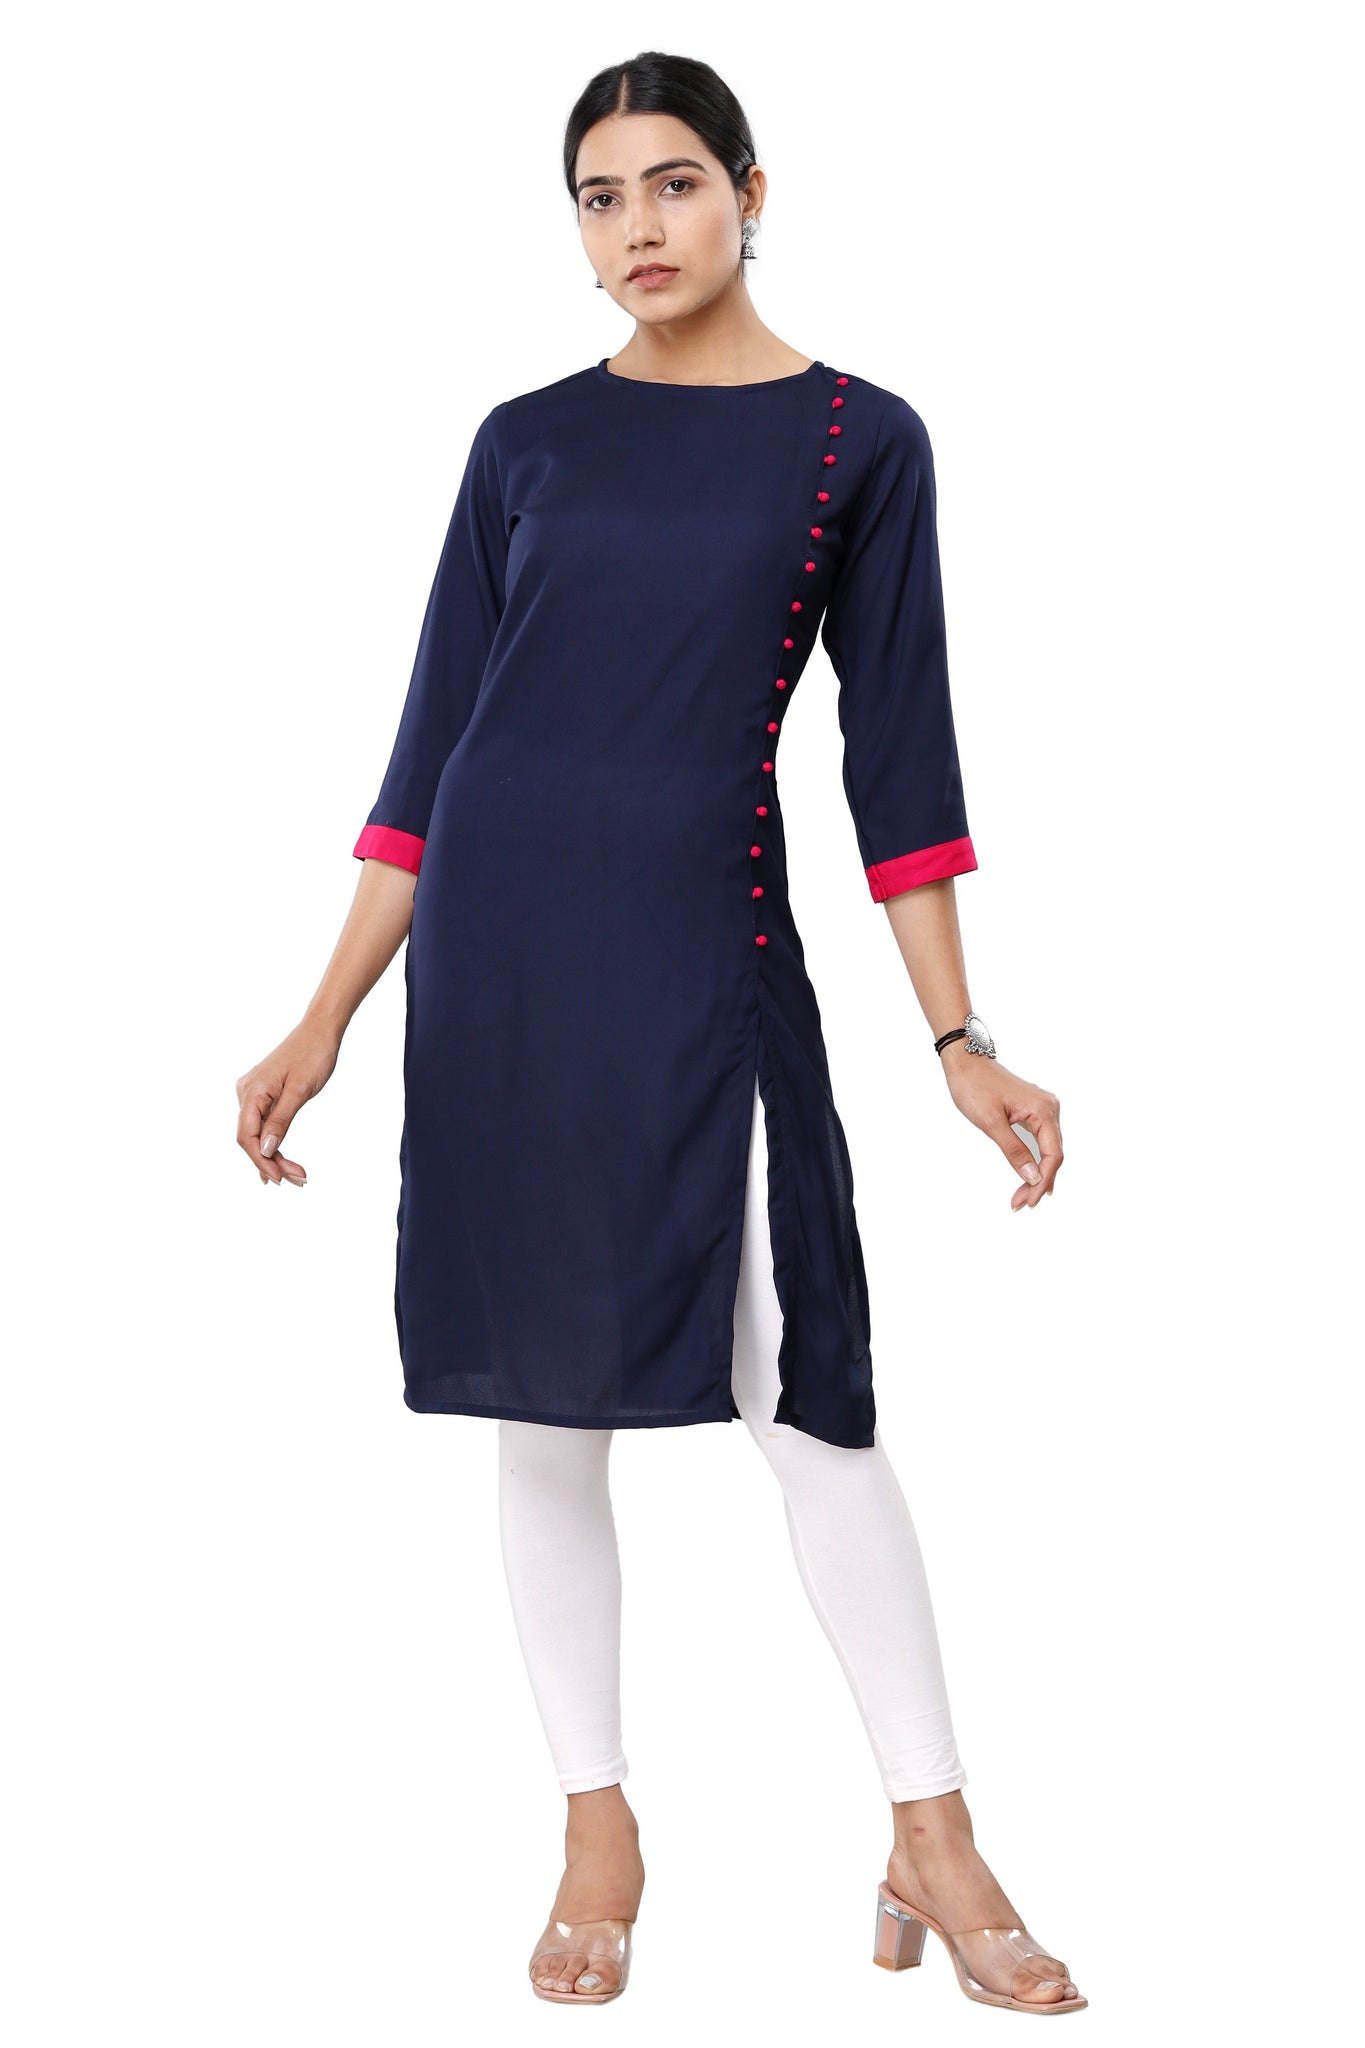 Indian Rayon Solid Navy Blue Short Kurti for Women